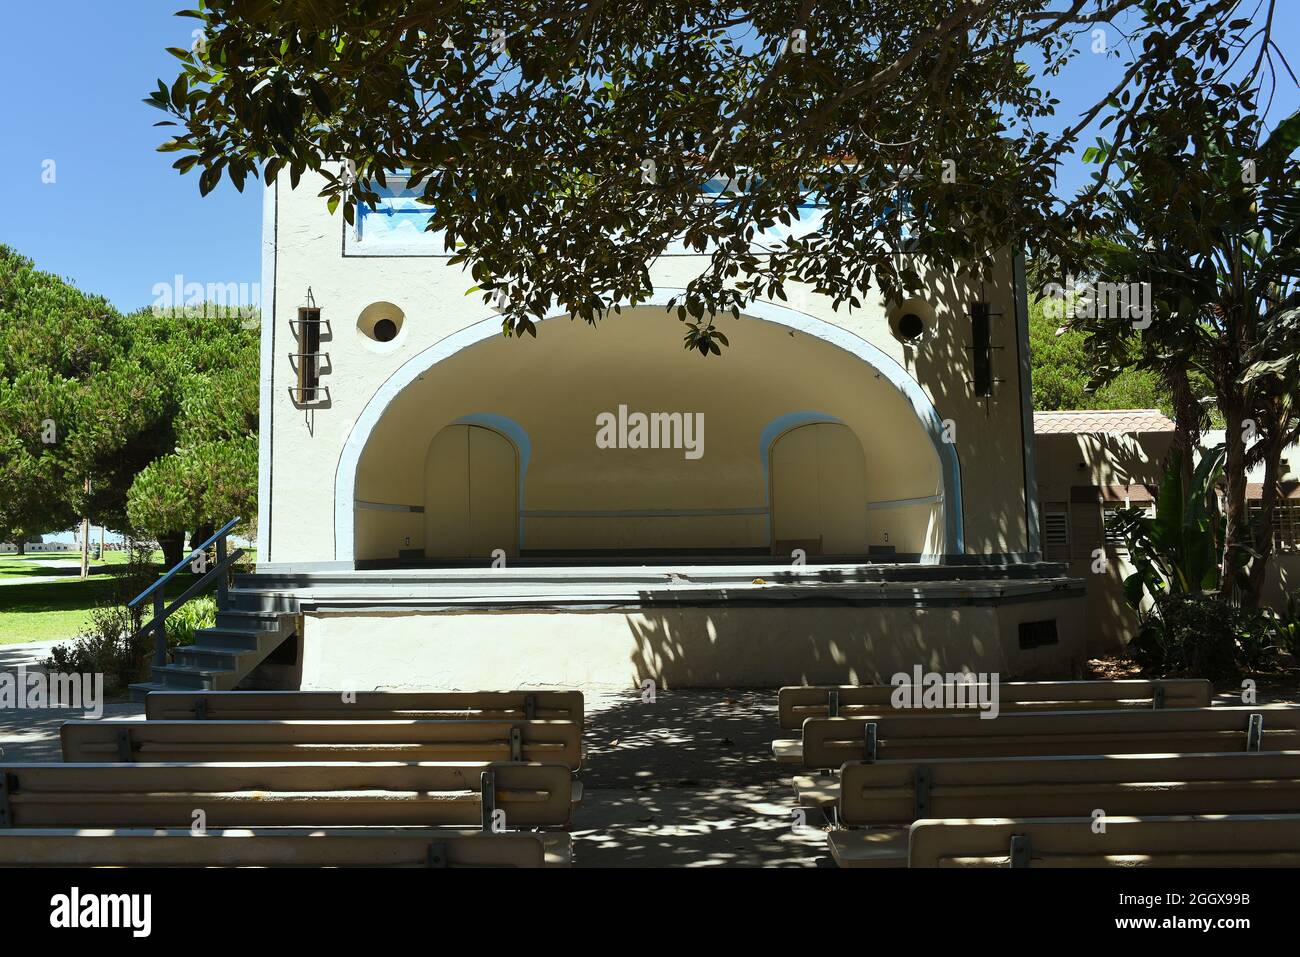 SAN PEDRO, CALIFORNIA - 27 AUG 2021: Amphitheater at Point Fermin Park, 37 landscaped acres of tree-shaded lawns, sheltered pergolas, colorful gardens Stock Photo